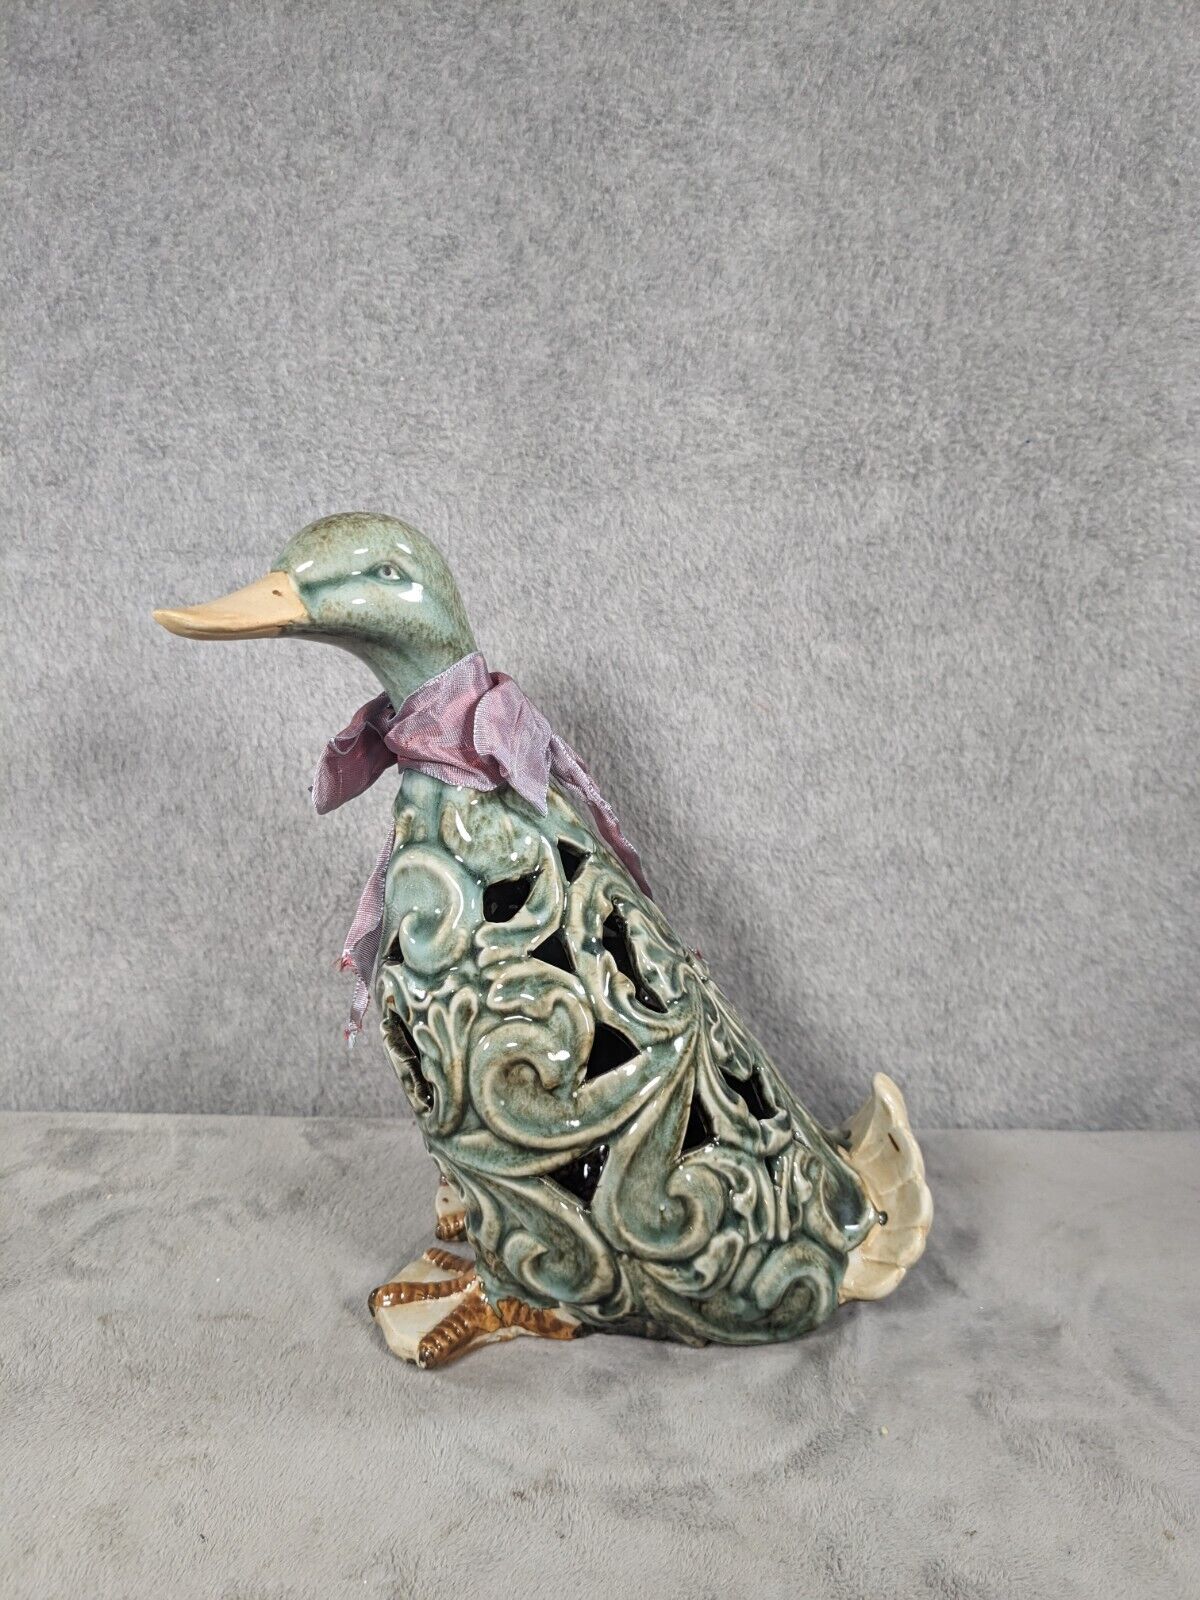 Vintage Handcrafted Ceramic Duck With Scarf Statue